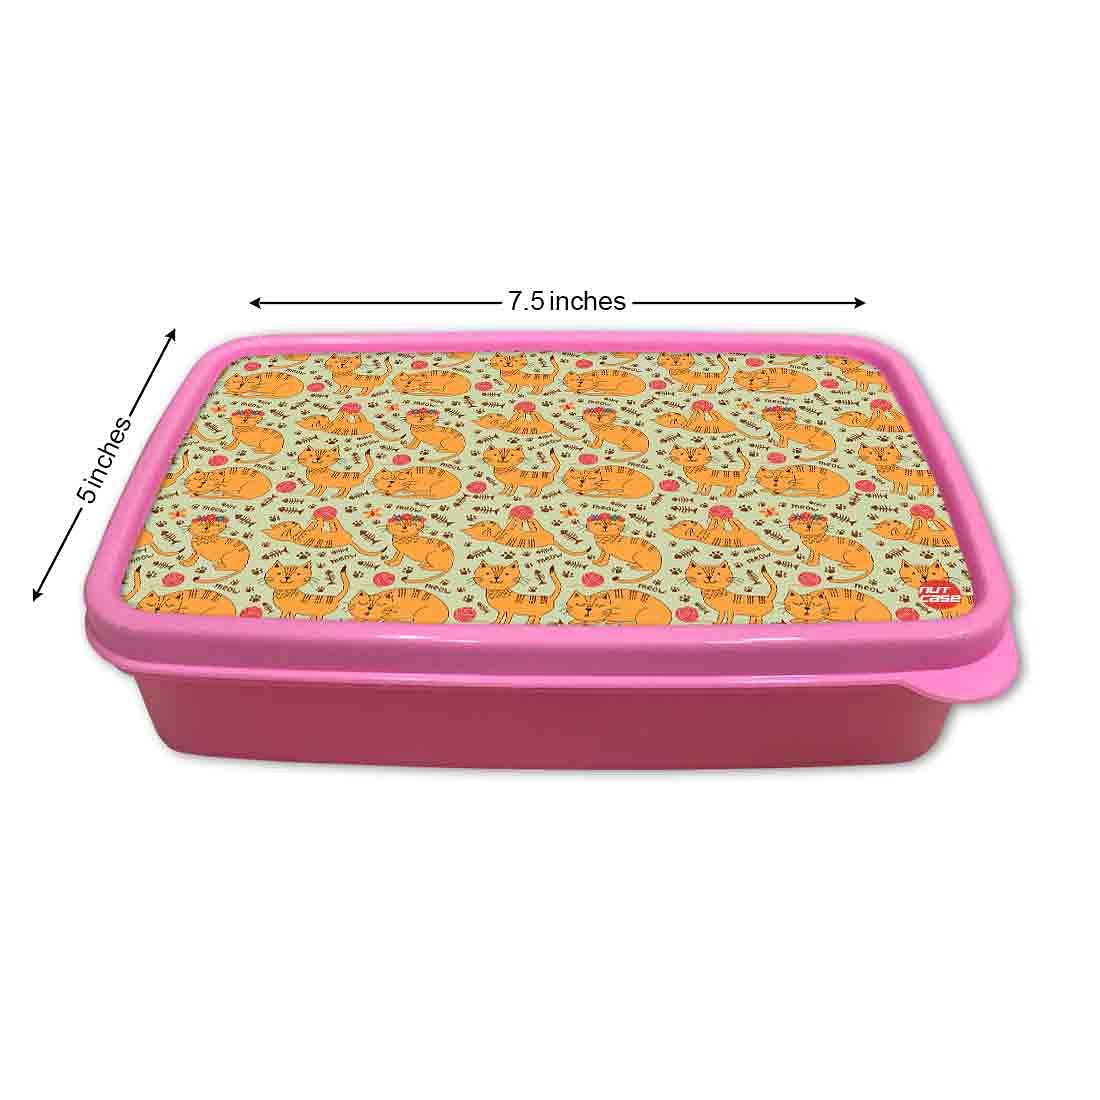 School Girls Lunch Box for Snacks With Small Container - Cute Cat Nutcase